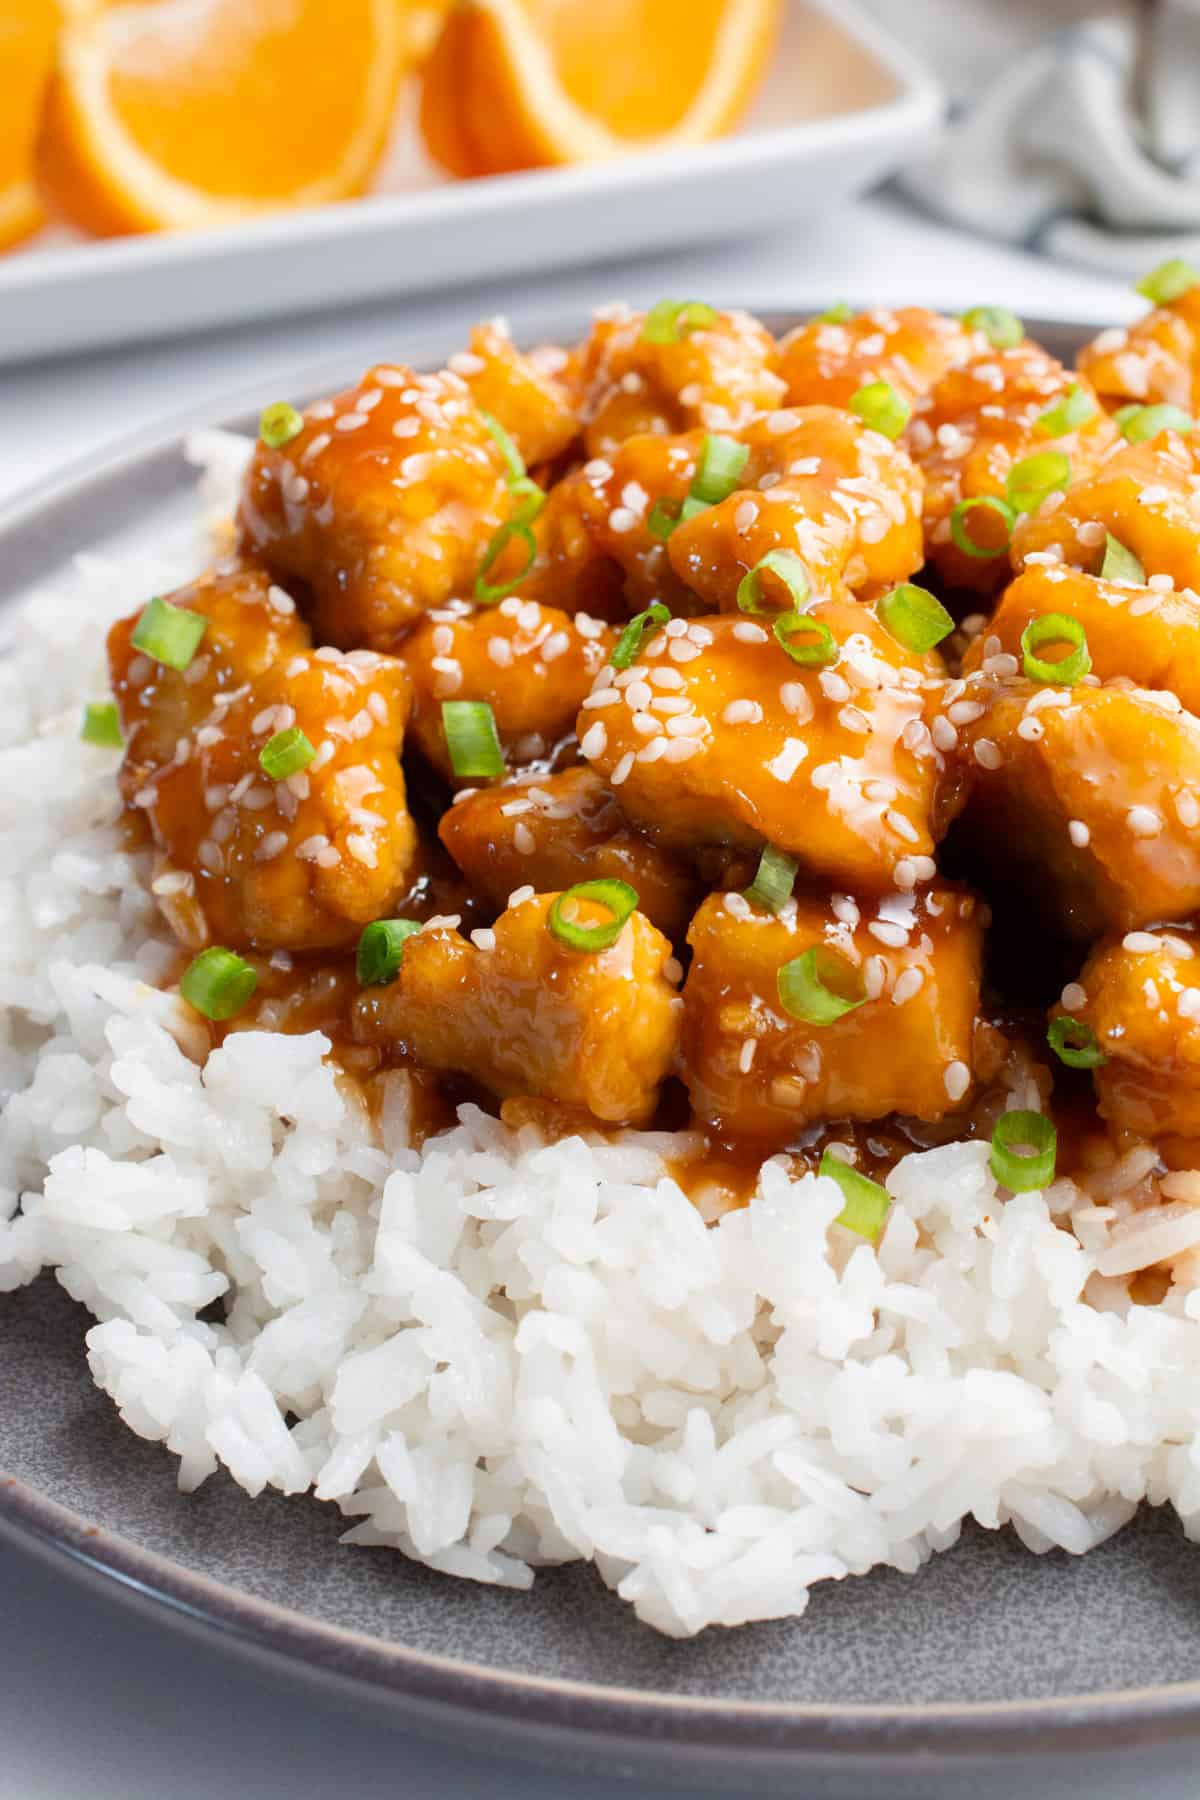 Orange tofu on a bed of white rice topped with sesame seeds and chopped green onions.